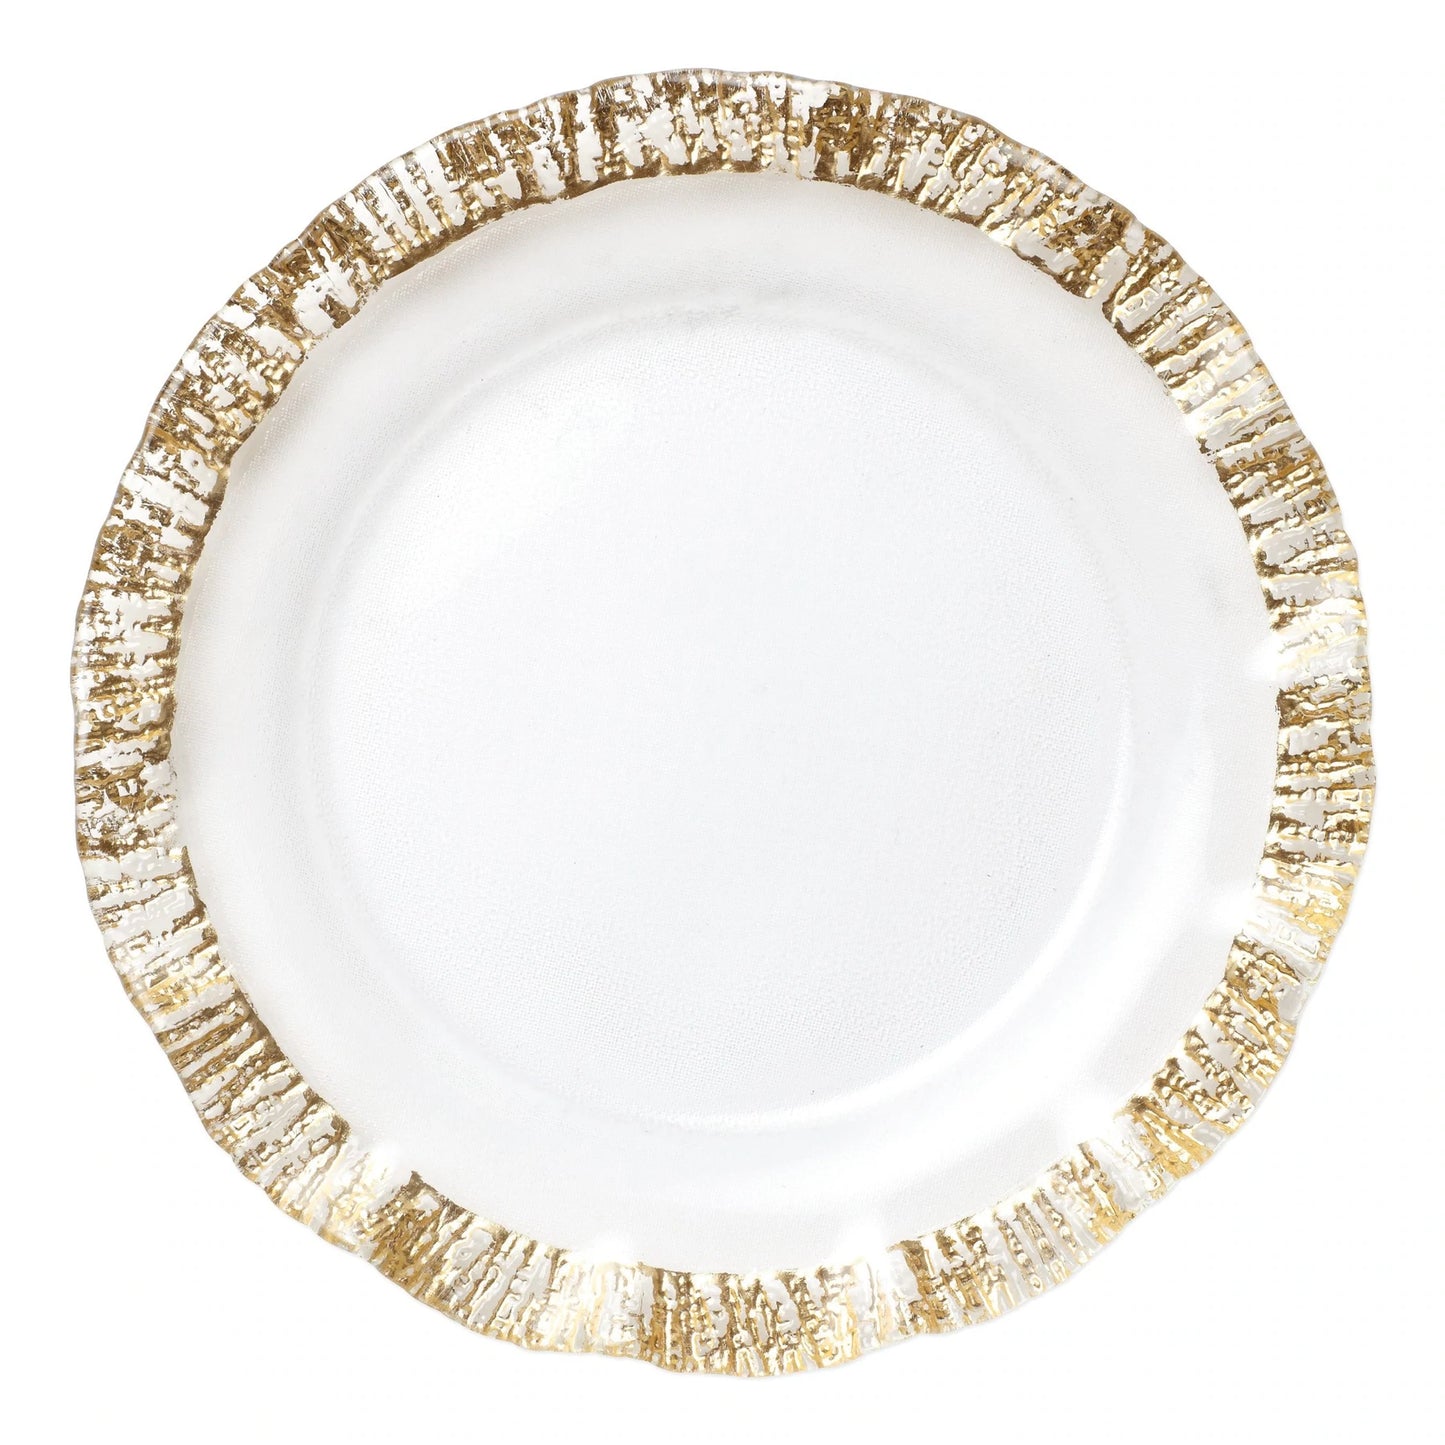 Rufolo Glass Gold Service Plate / Charger